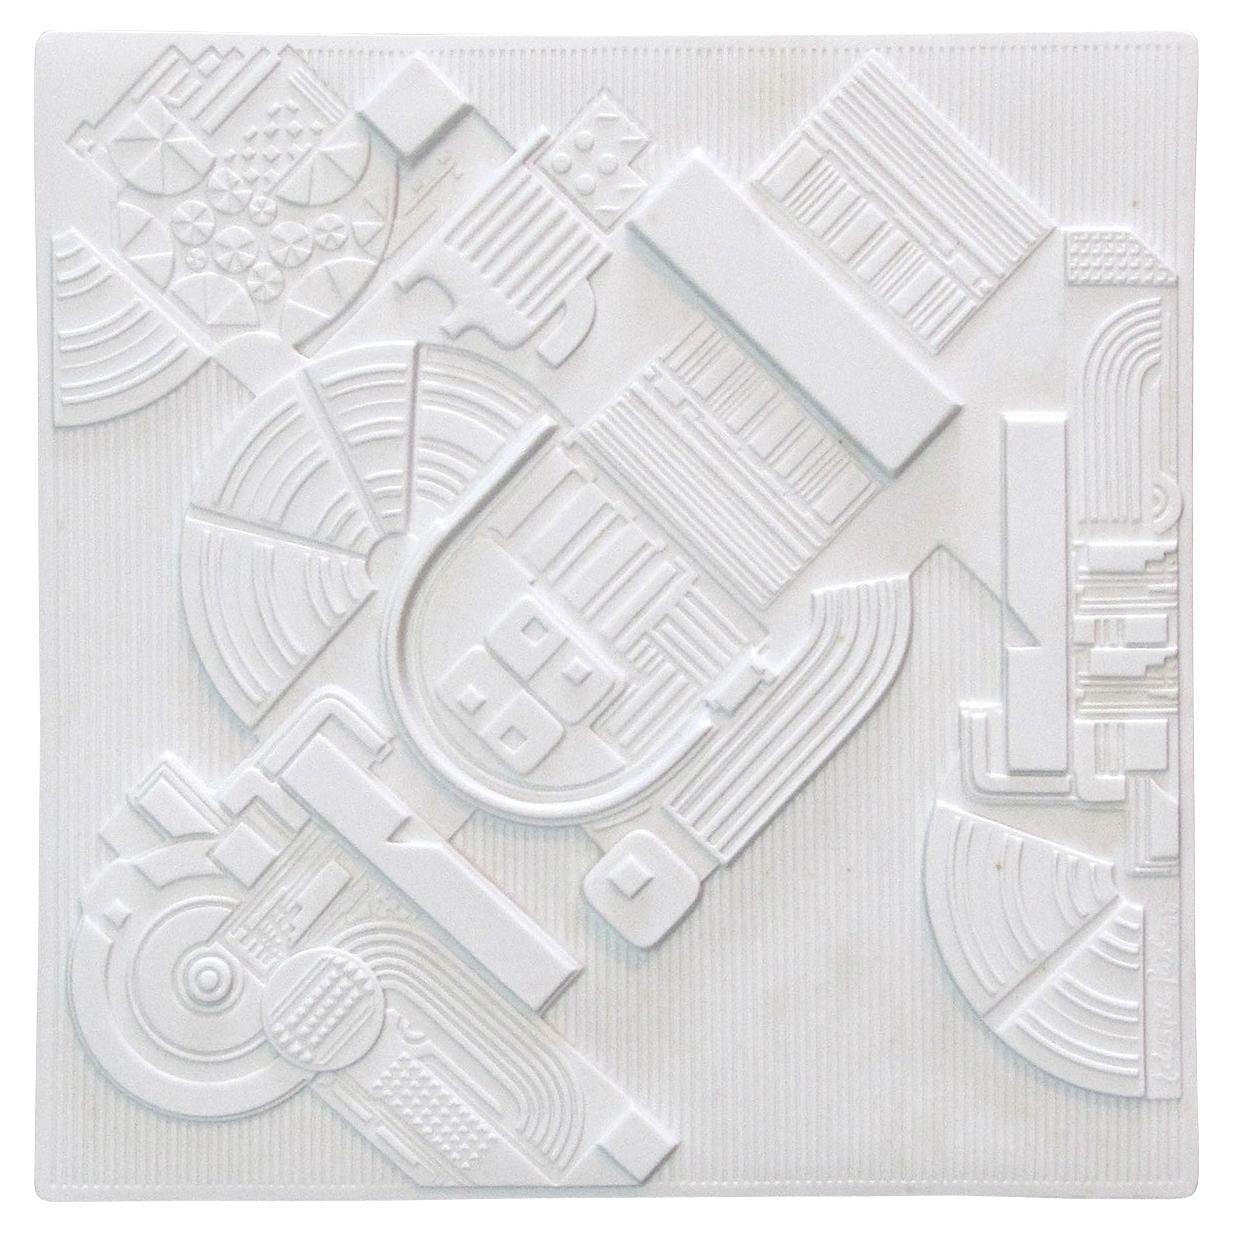 Year Plate by Eduardo Paolozzi for Rosenthal, 1978